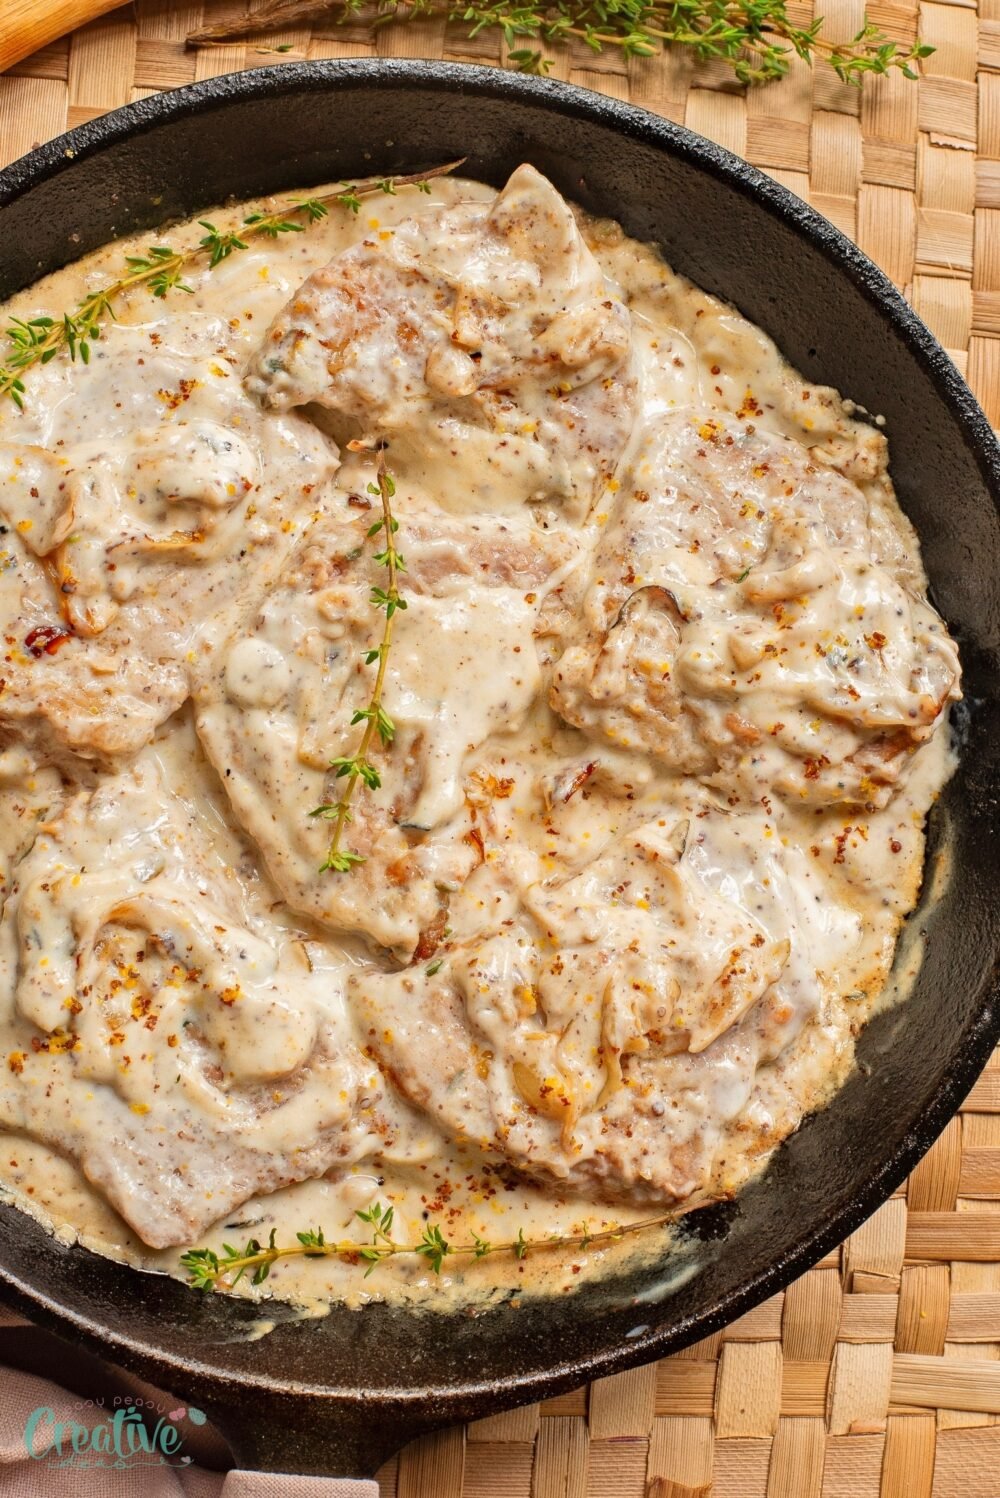 Savor a tasty pork in creamy mustard sauce that'll leave you wanting more. 